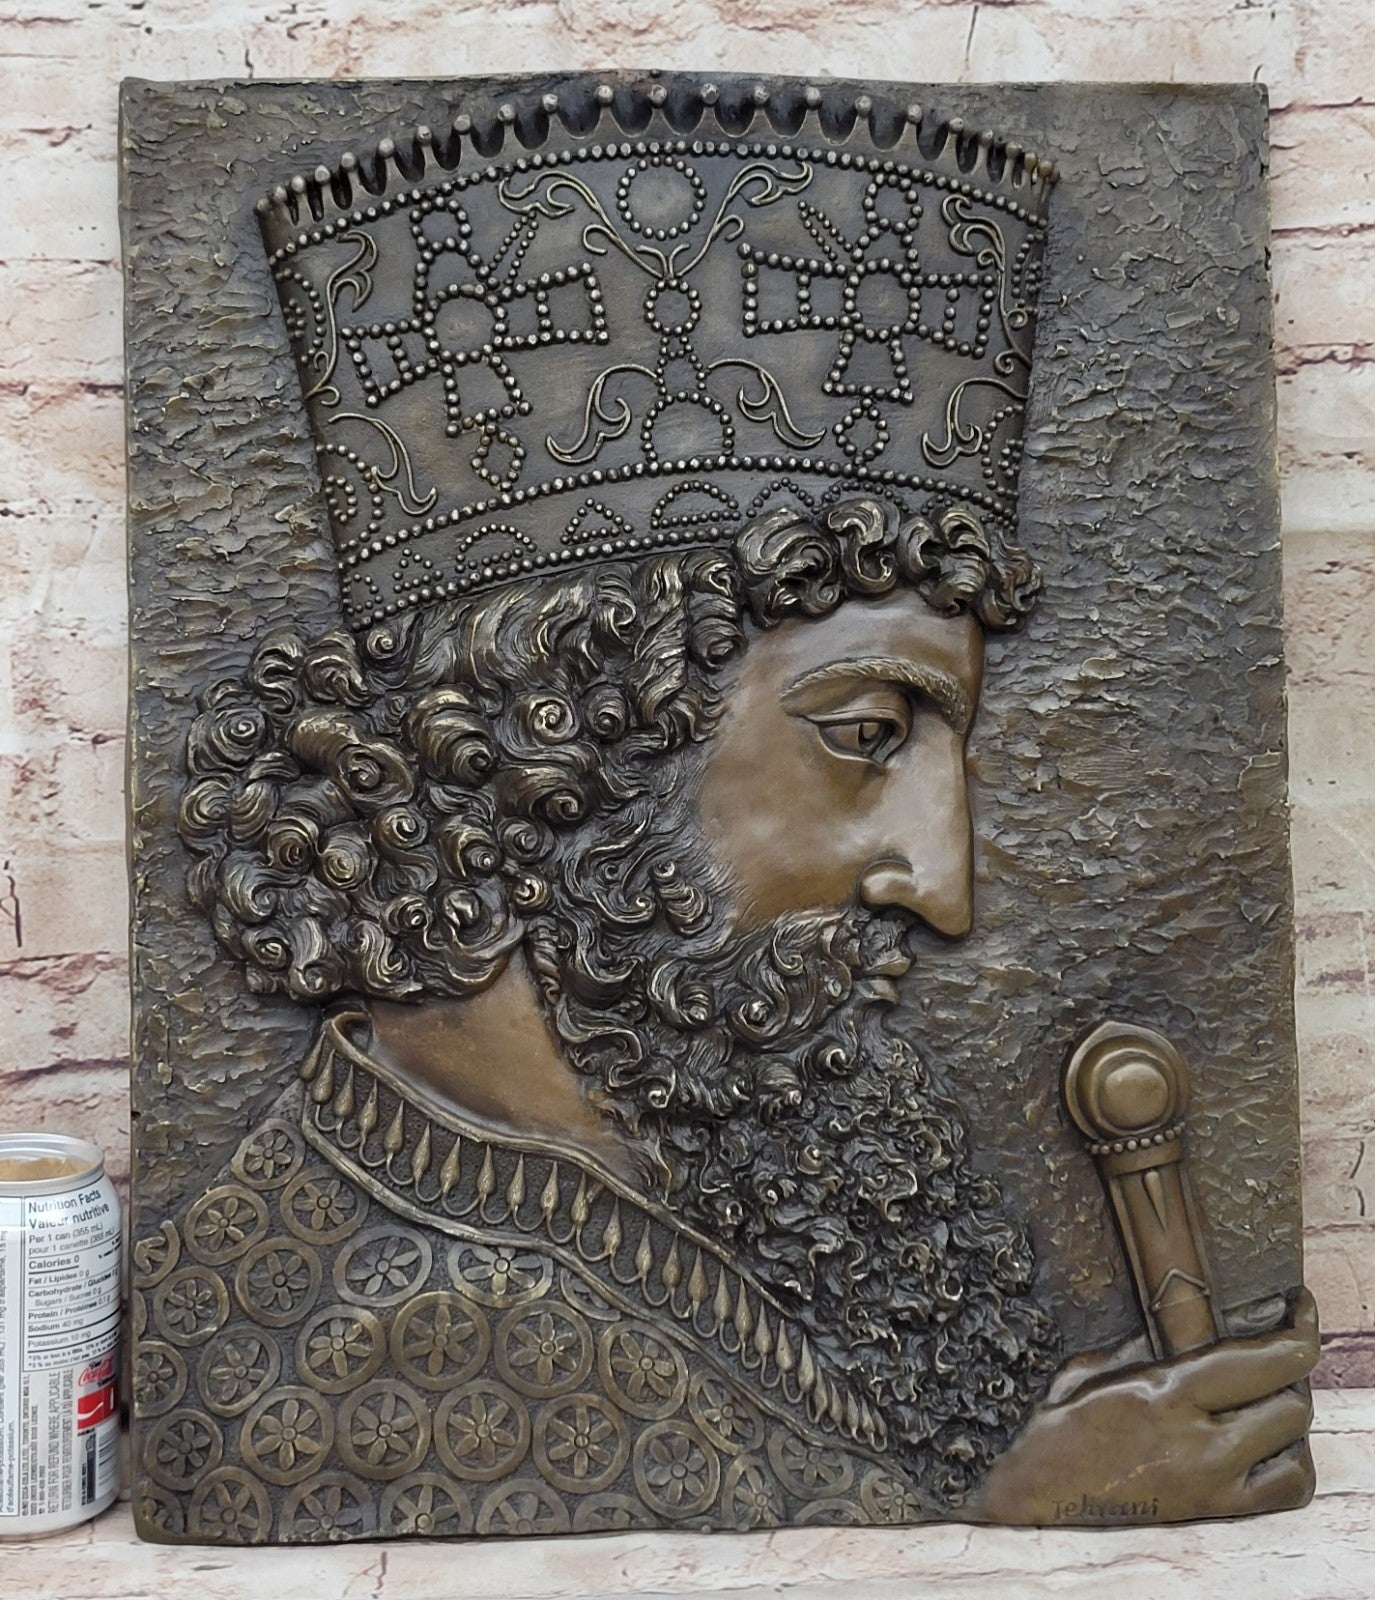 Vintage Artwork: Wall-Mounted Bronze Sculpture Depicting Cyrus The Great of Persia